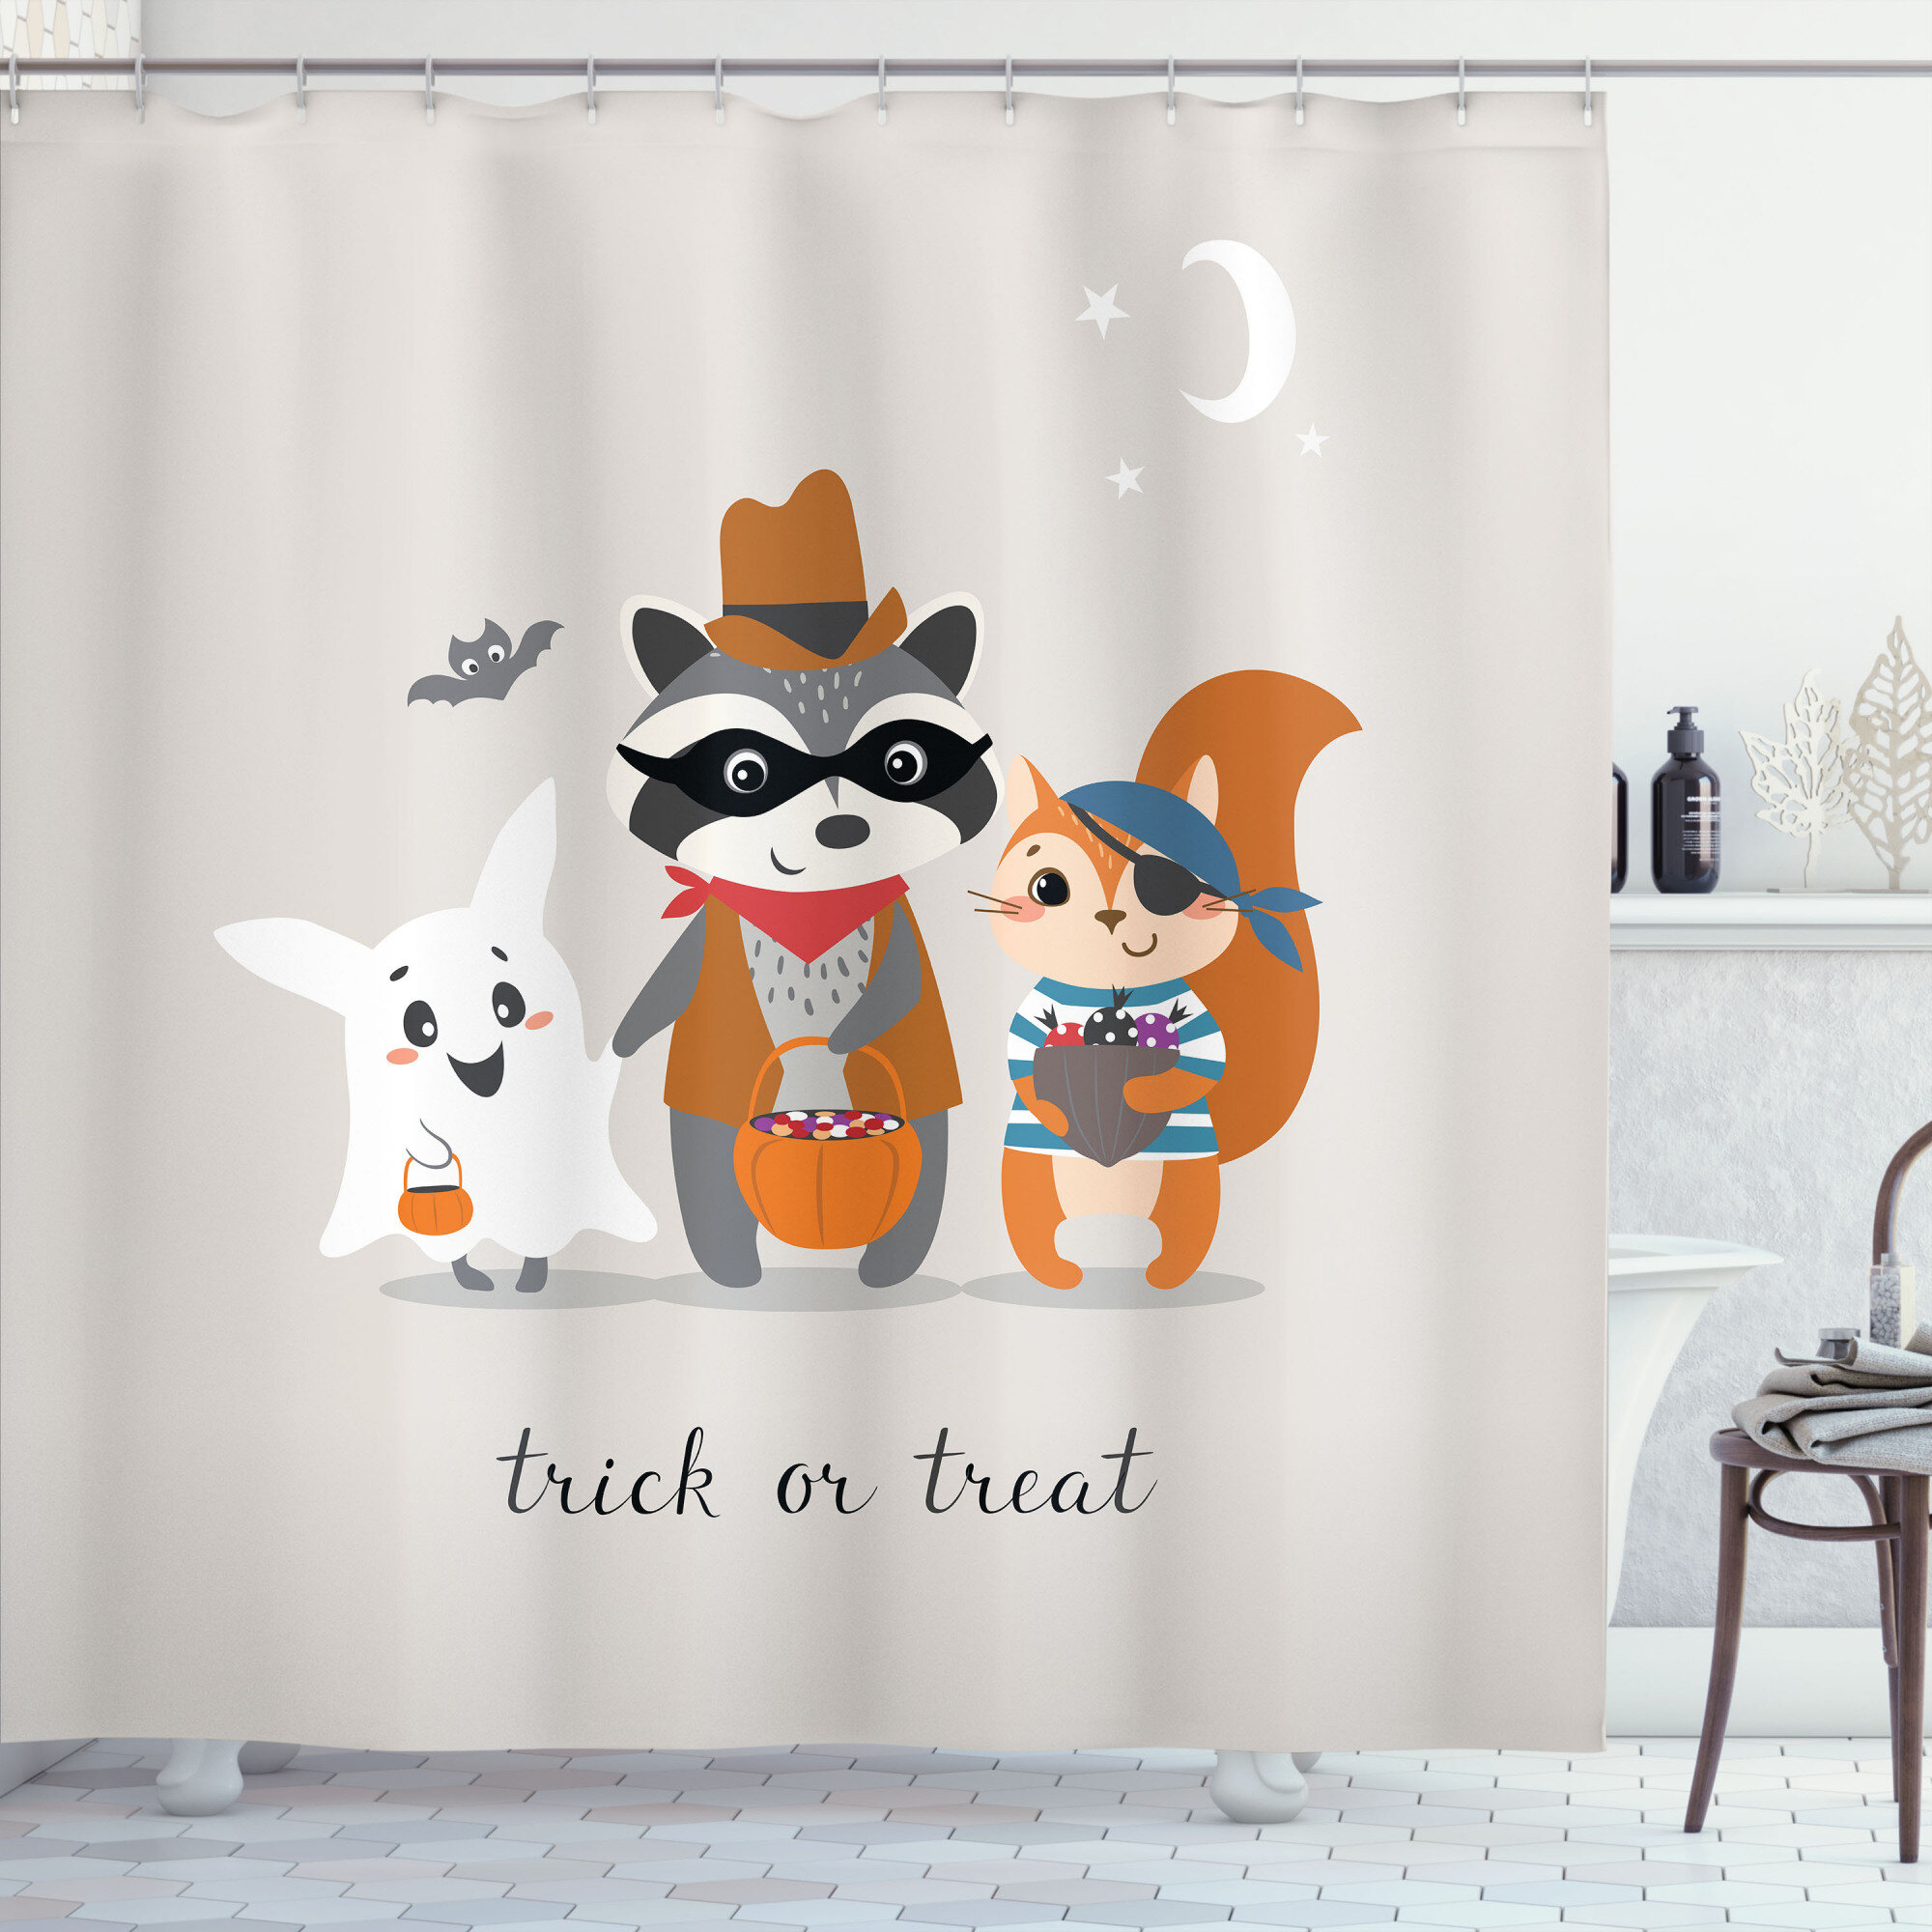 Ghost Shower Curtain Set + Hooks East Urban Home Size: 75 H x 69 W